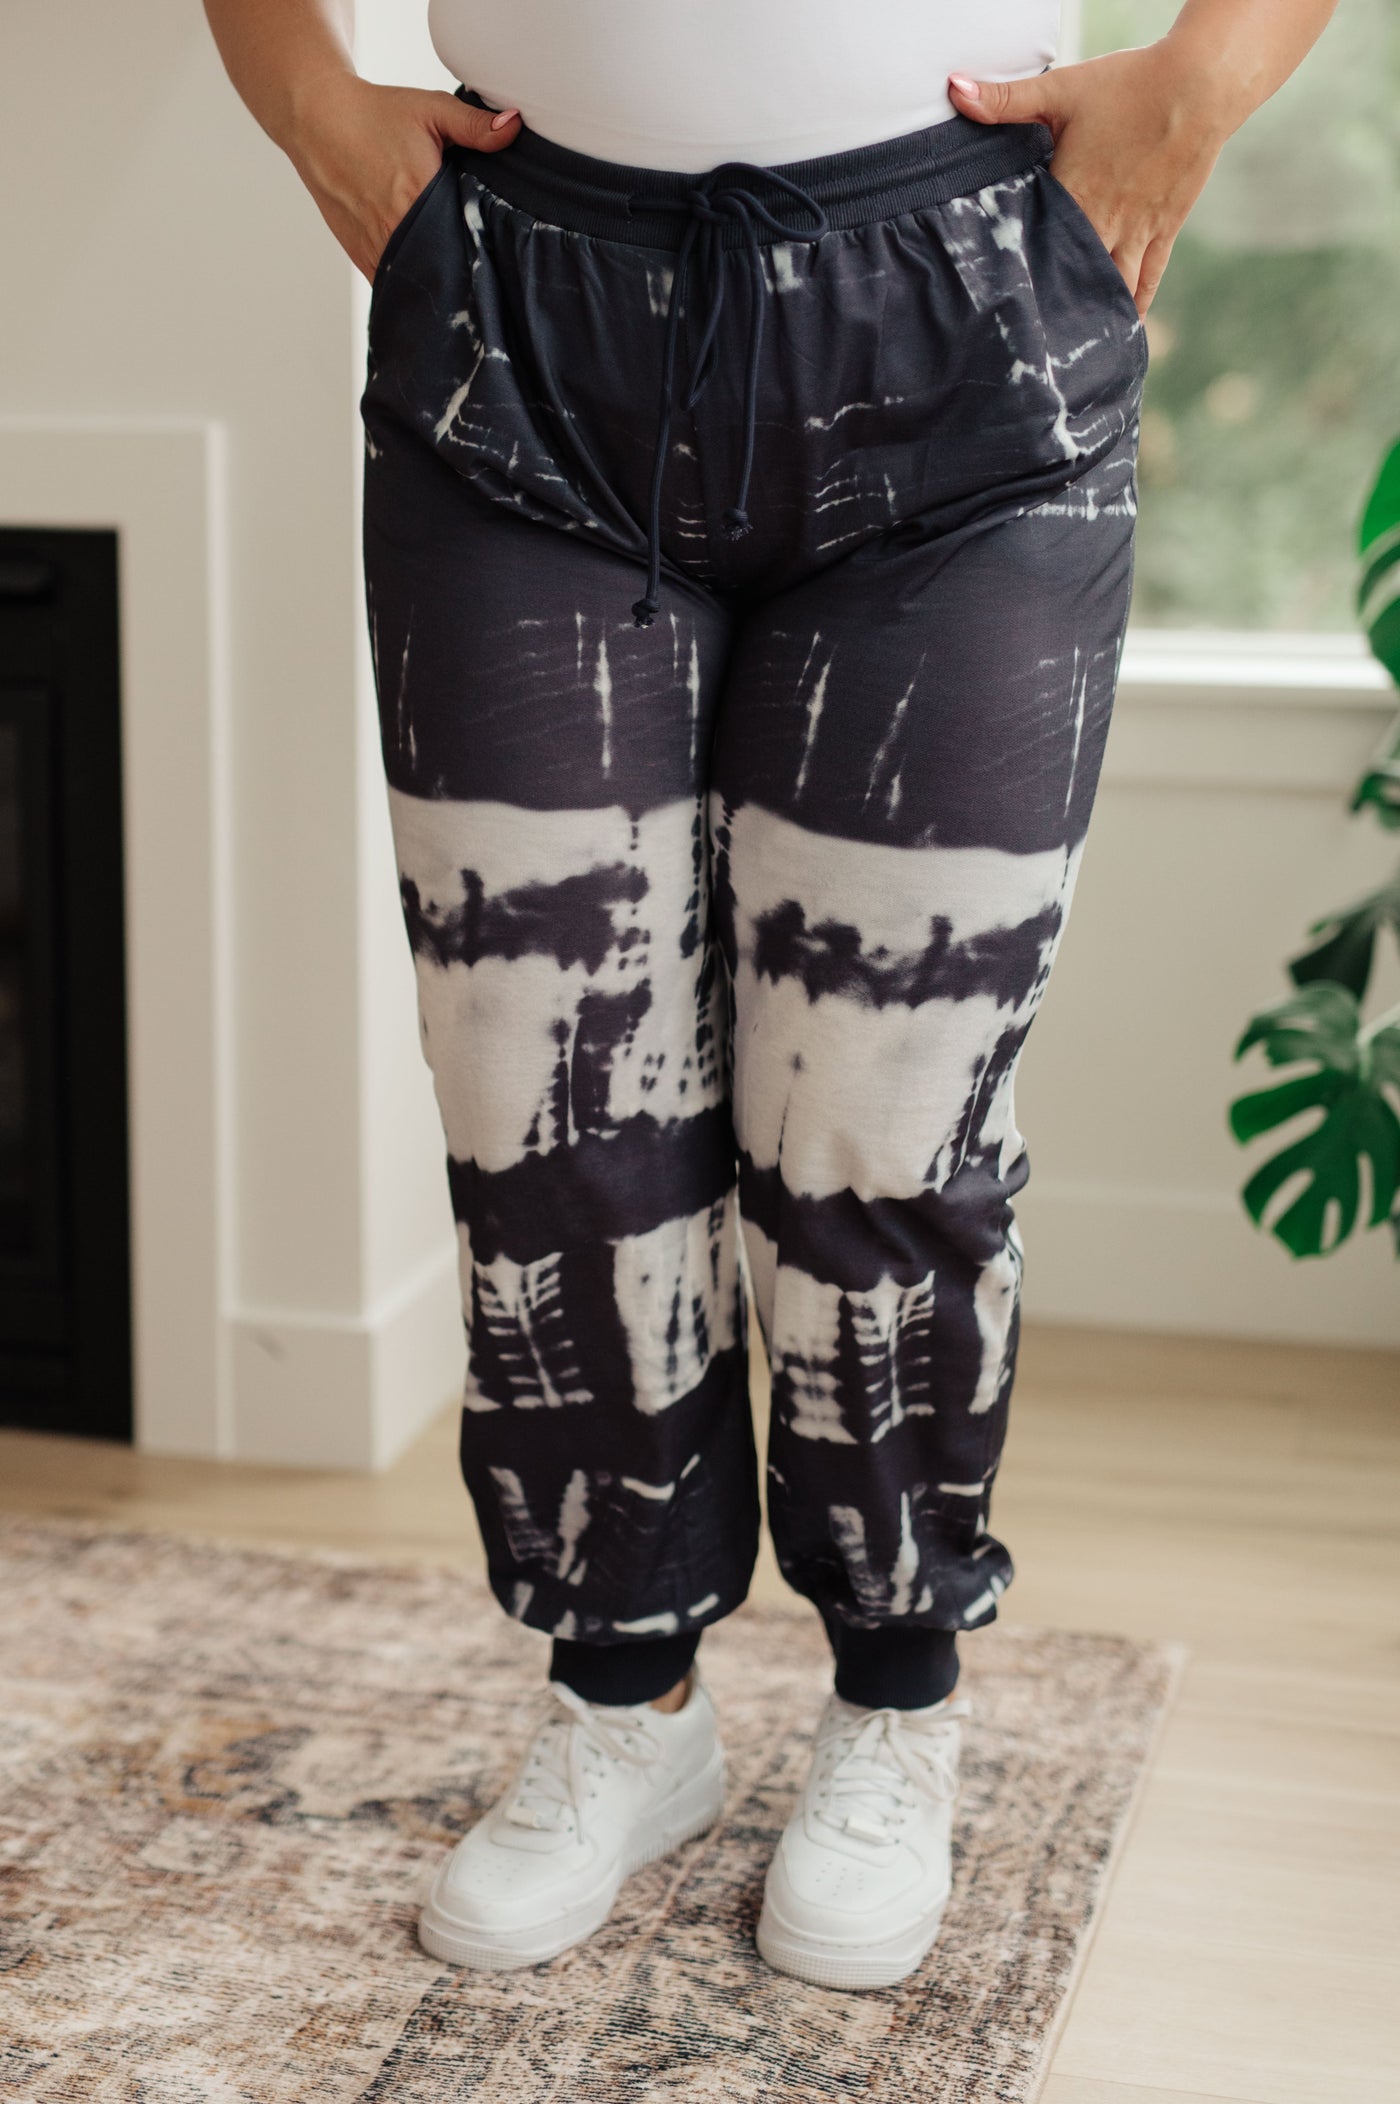 With a tie dye pattern, jogger silhouette and elastic waistband with drawstring, you’ll be on trend and comfortable all day.